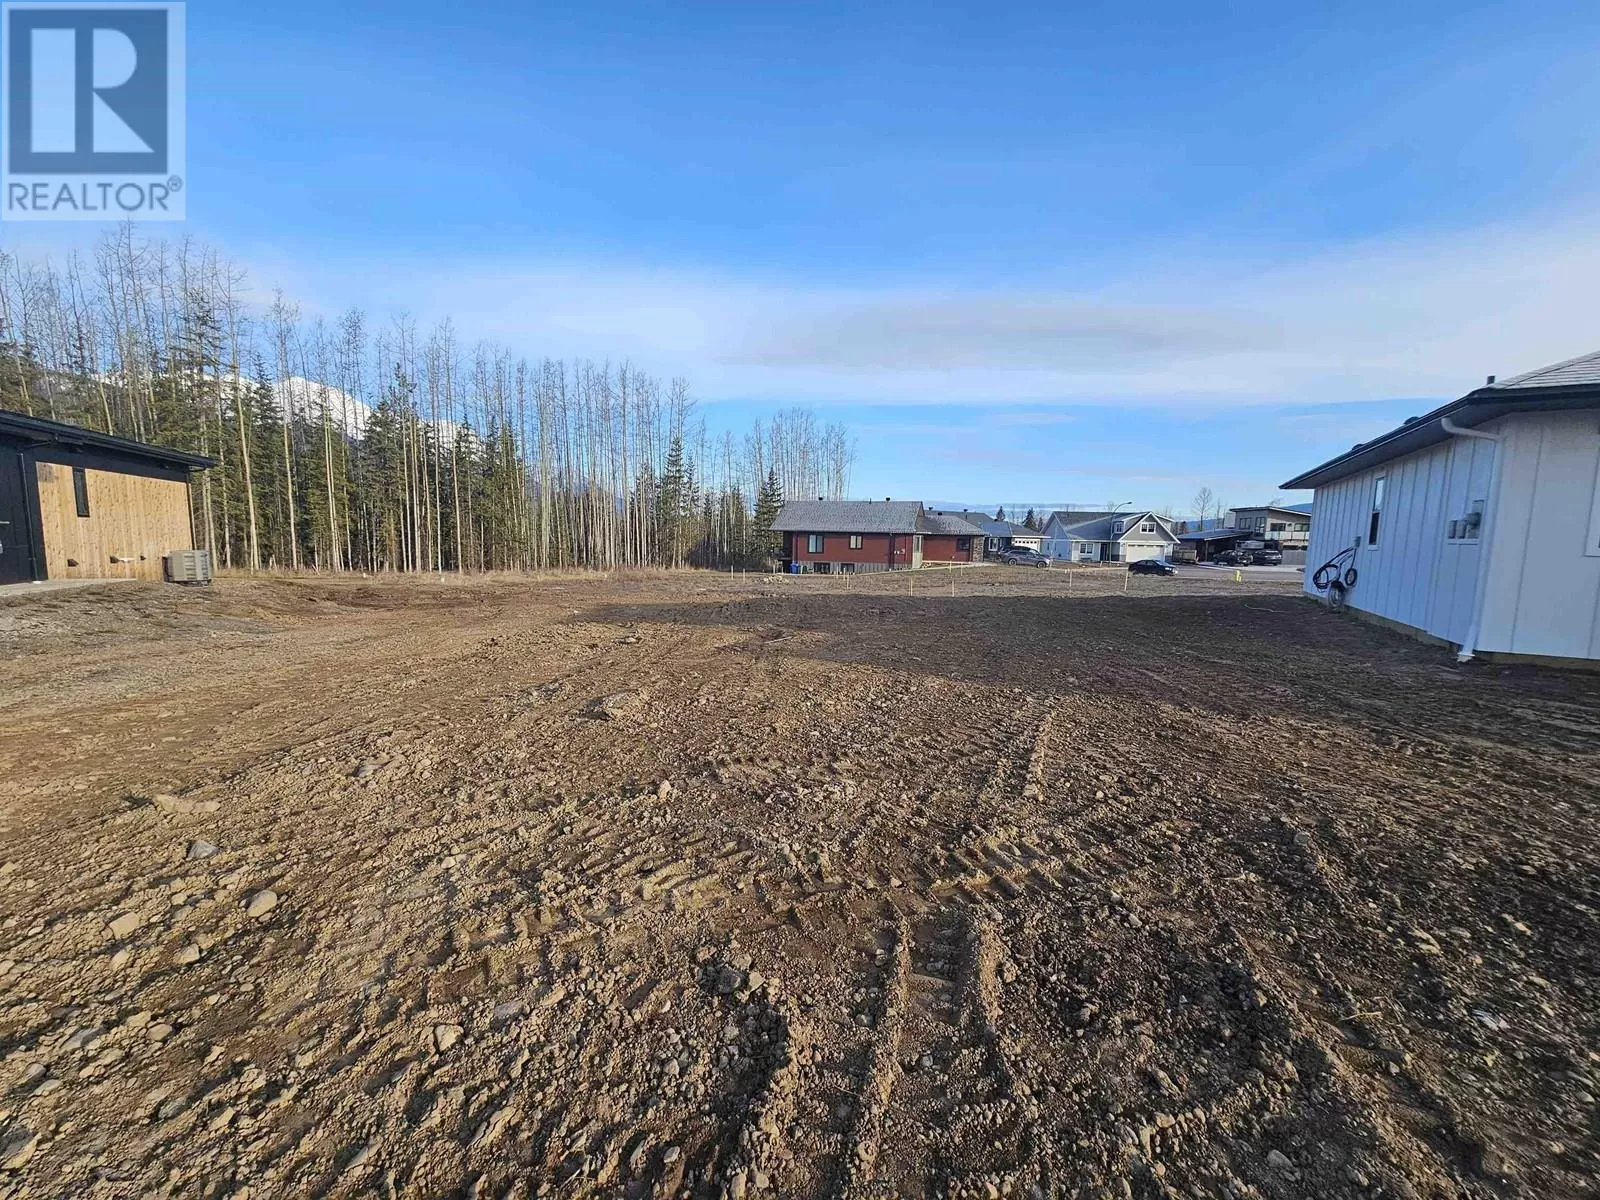 Lot 7 Meadow Place, Smithers, British Columbia V0J 2N0